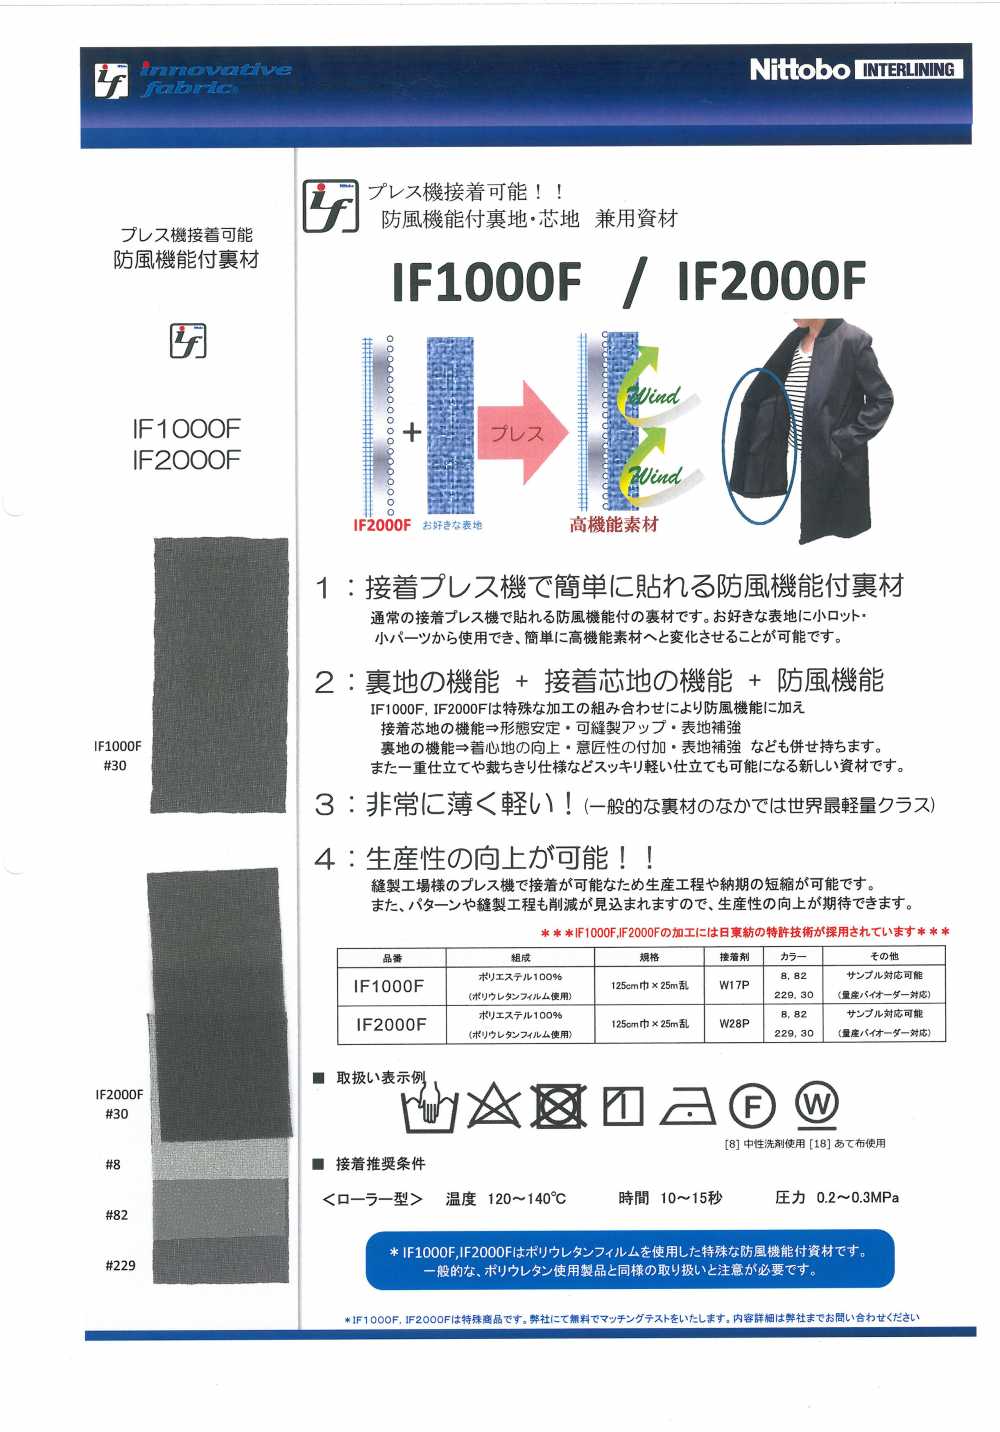 IF2000F Lining / Interlining Material With Windproof Function Nittobo